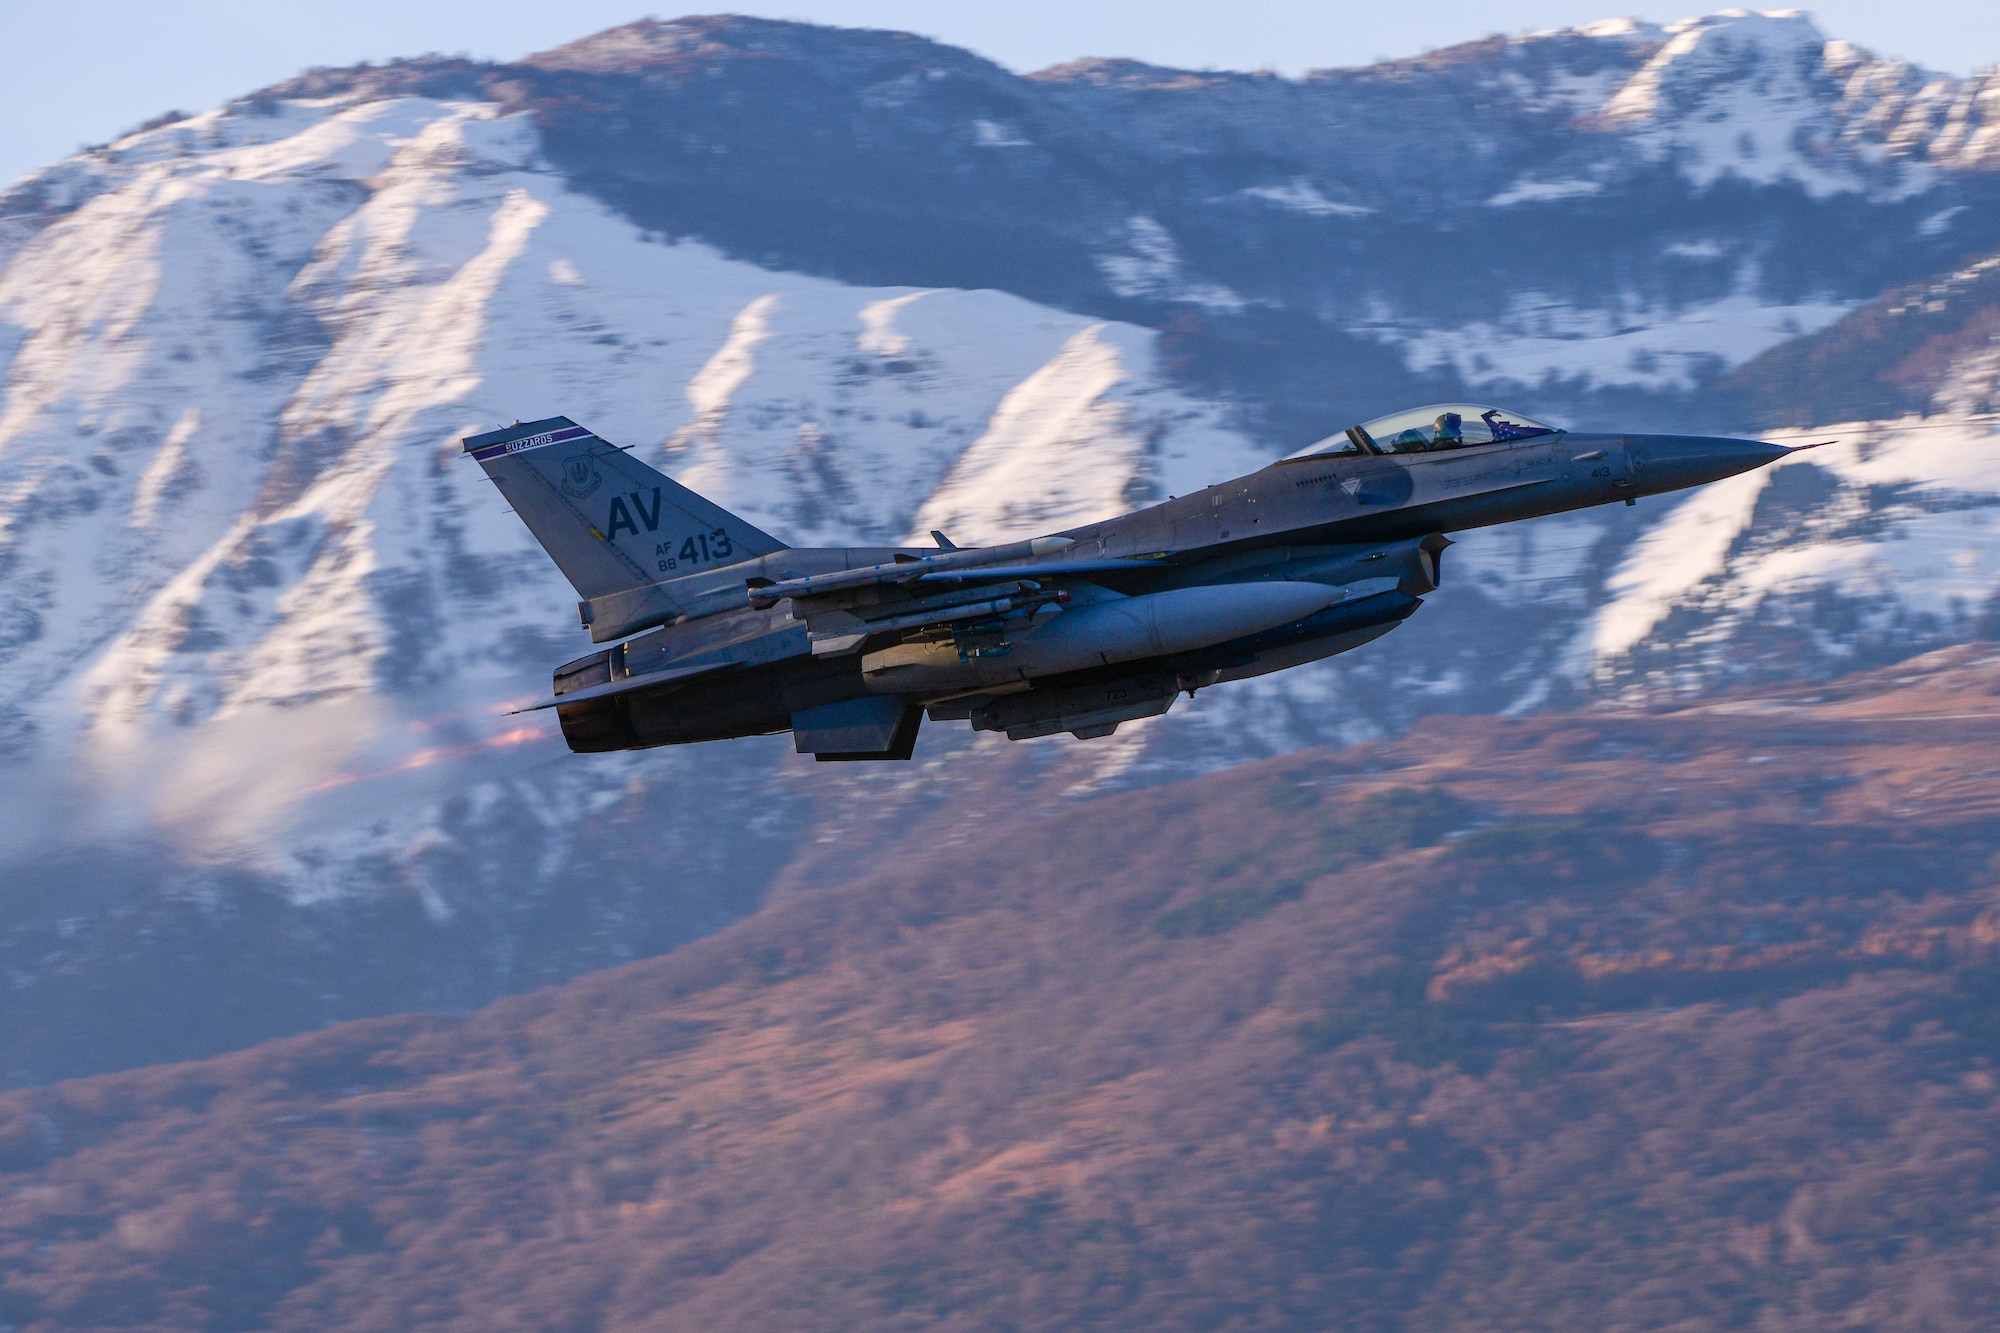 A U.S. Air Force F-16 Fighting Falcon assigned to the 510th Fighter Squadron, takes off at Aviano Air Base, Italy, Nov. 30, 2021. The mission of the 31st Fighter Wing is to deter through safe, secure, effective operations to win the current fight and be ready to win the next fight. The F-16 is able to fly more than 500 miles, deliver its weapons with superior accuracy, defend itself against enemy aircraft, and return to its starting point.  (U.S. Air Force photo by Senior Airman Brooke Moeder)